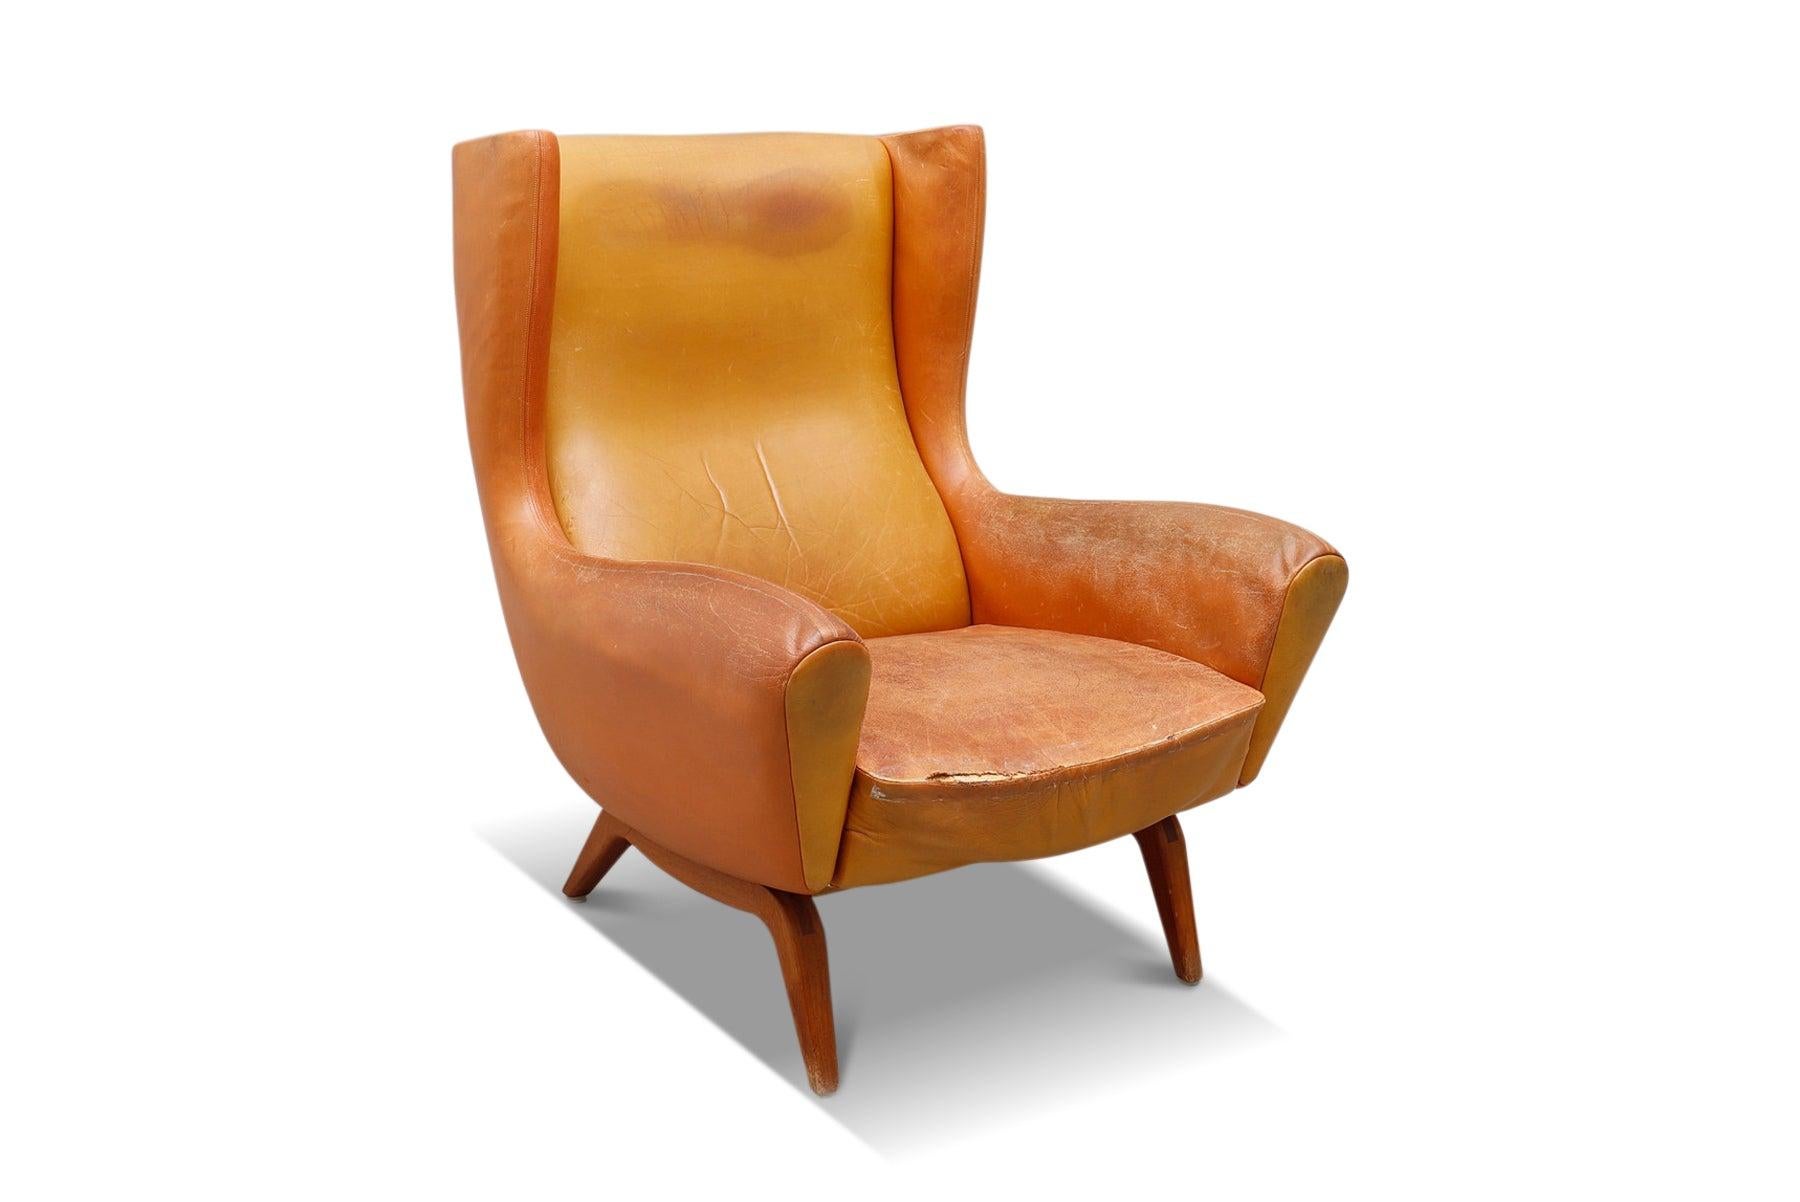 Illum Wikkelsø Model 110 High Wingback Lounge Chair in Original Cognac Leather In Excellent Condition For Sale In Berkeley, CA